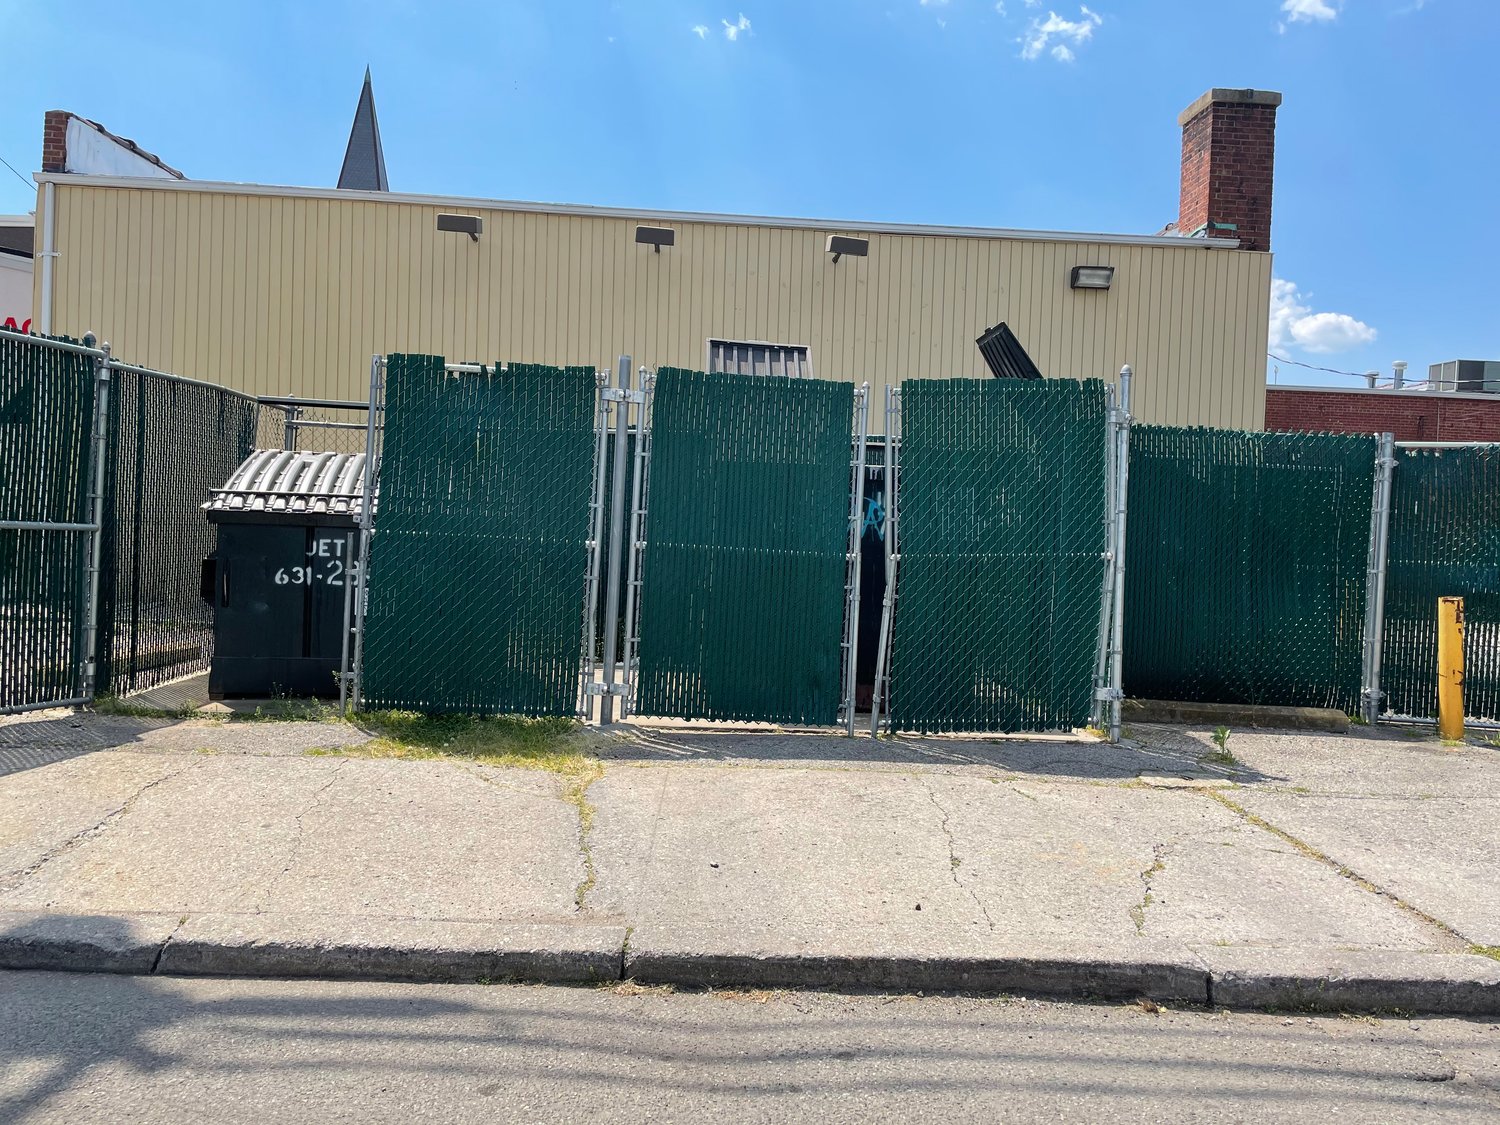 The dumpster area on Terry Street was seeing a lot of outsider dumping, causing an overflow that has now been solved, pushing the village to look at the issue as a whole.